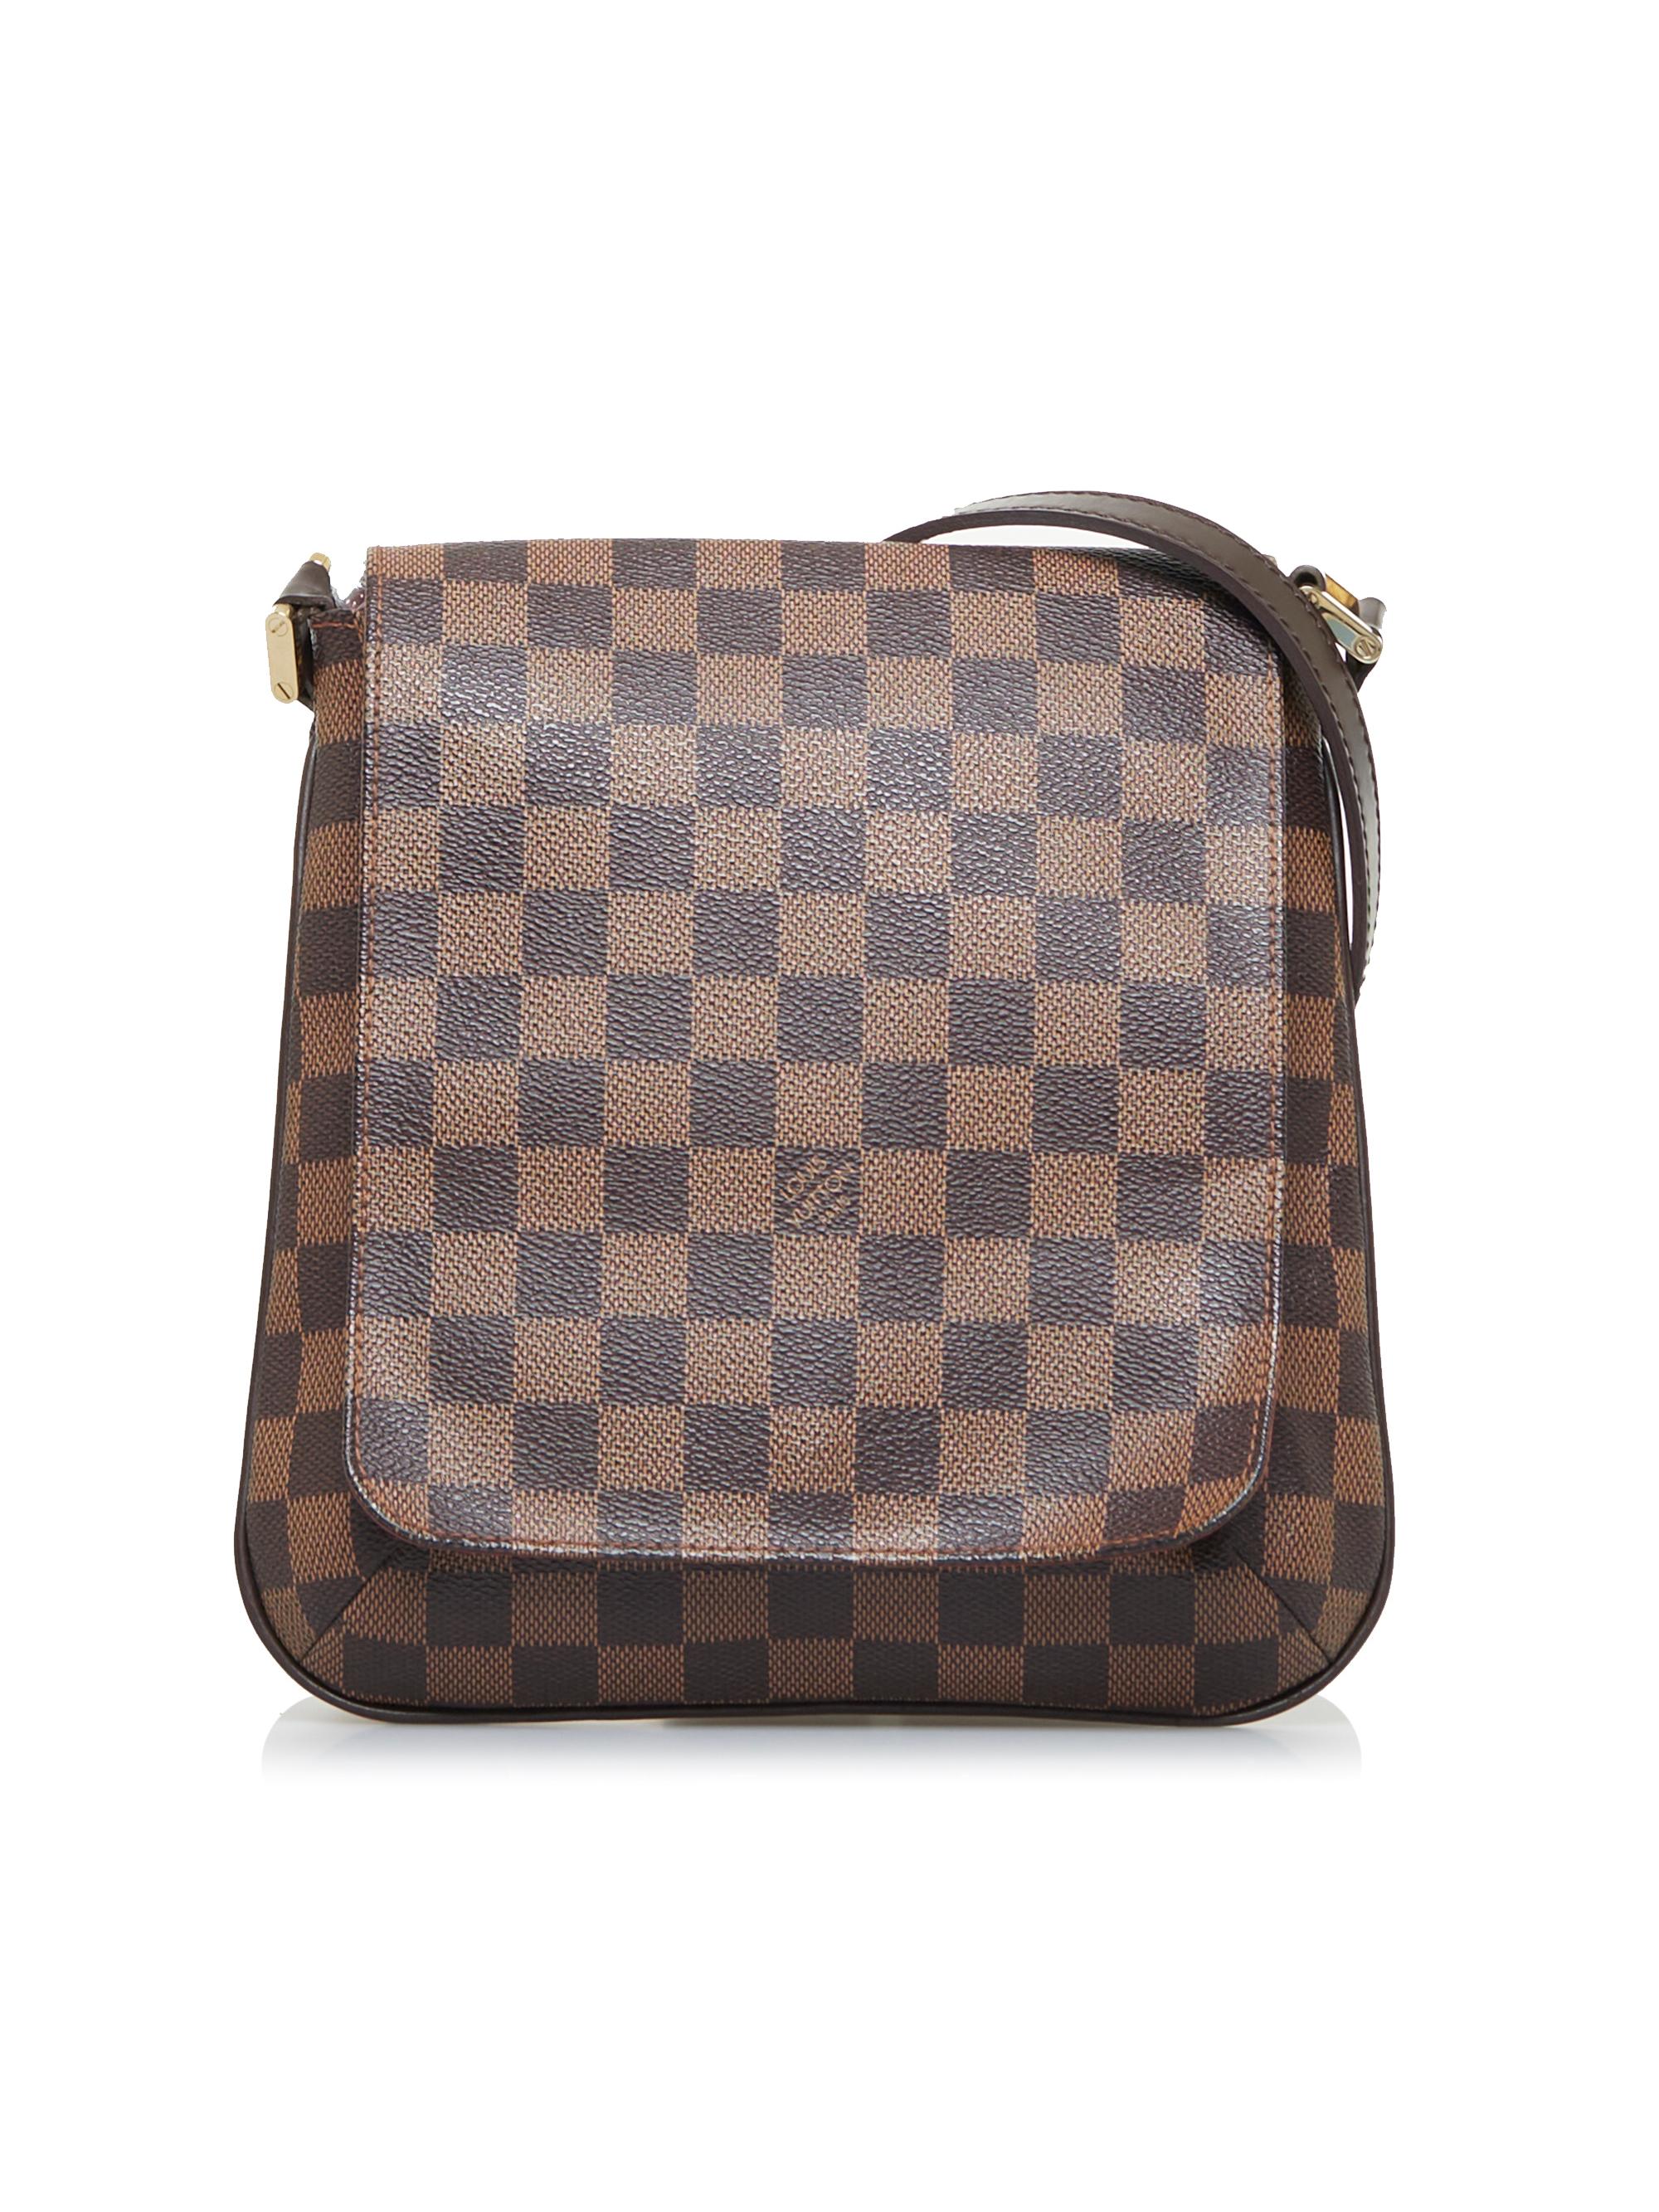 Louis Vuitton Neverfull GM Damier Tote bag $699.99 comes with certificate  of authenticity